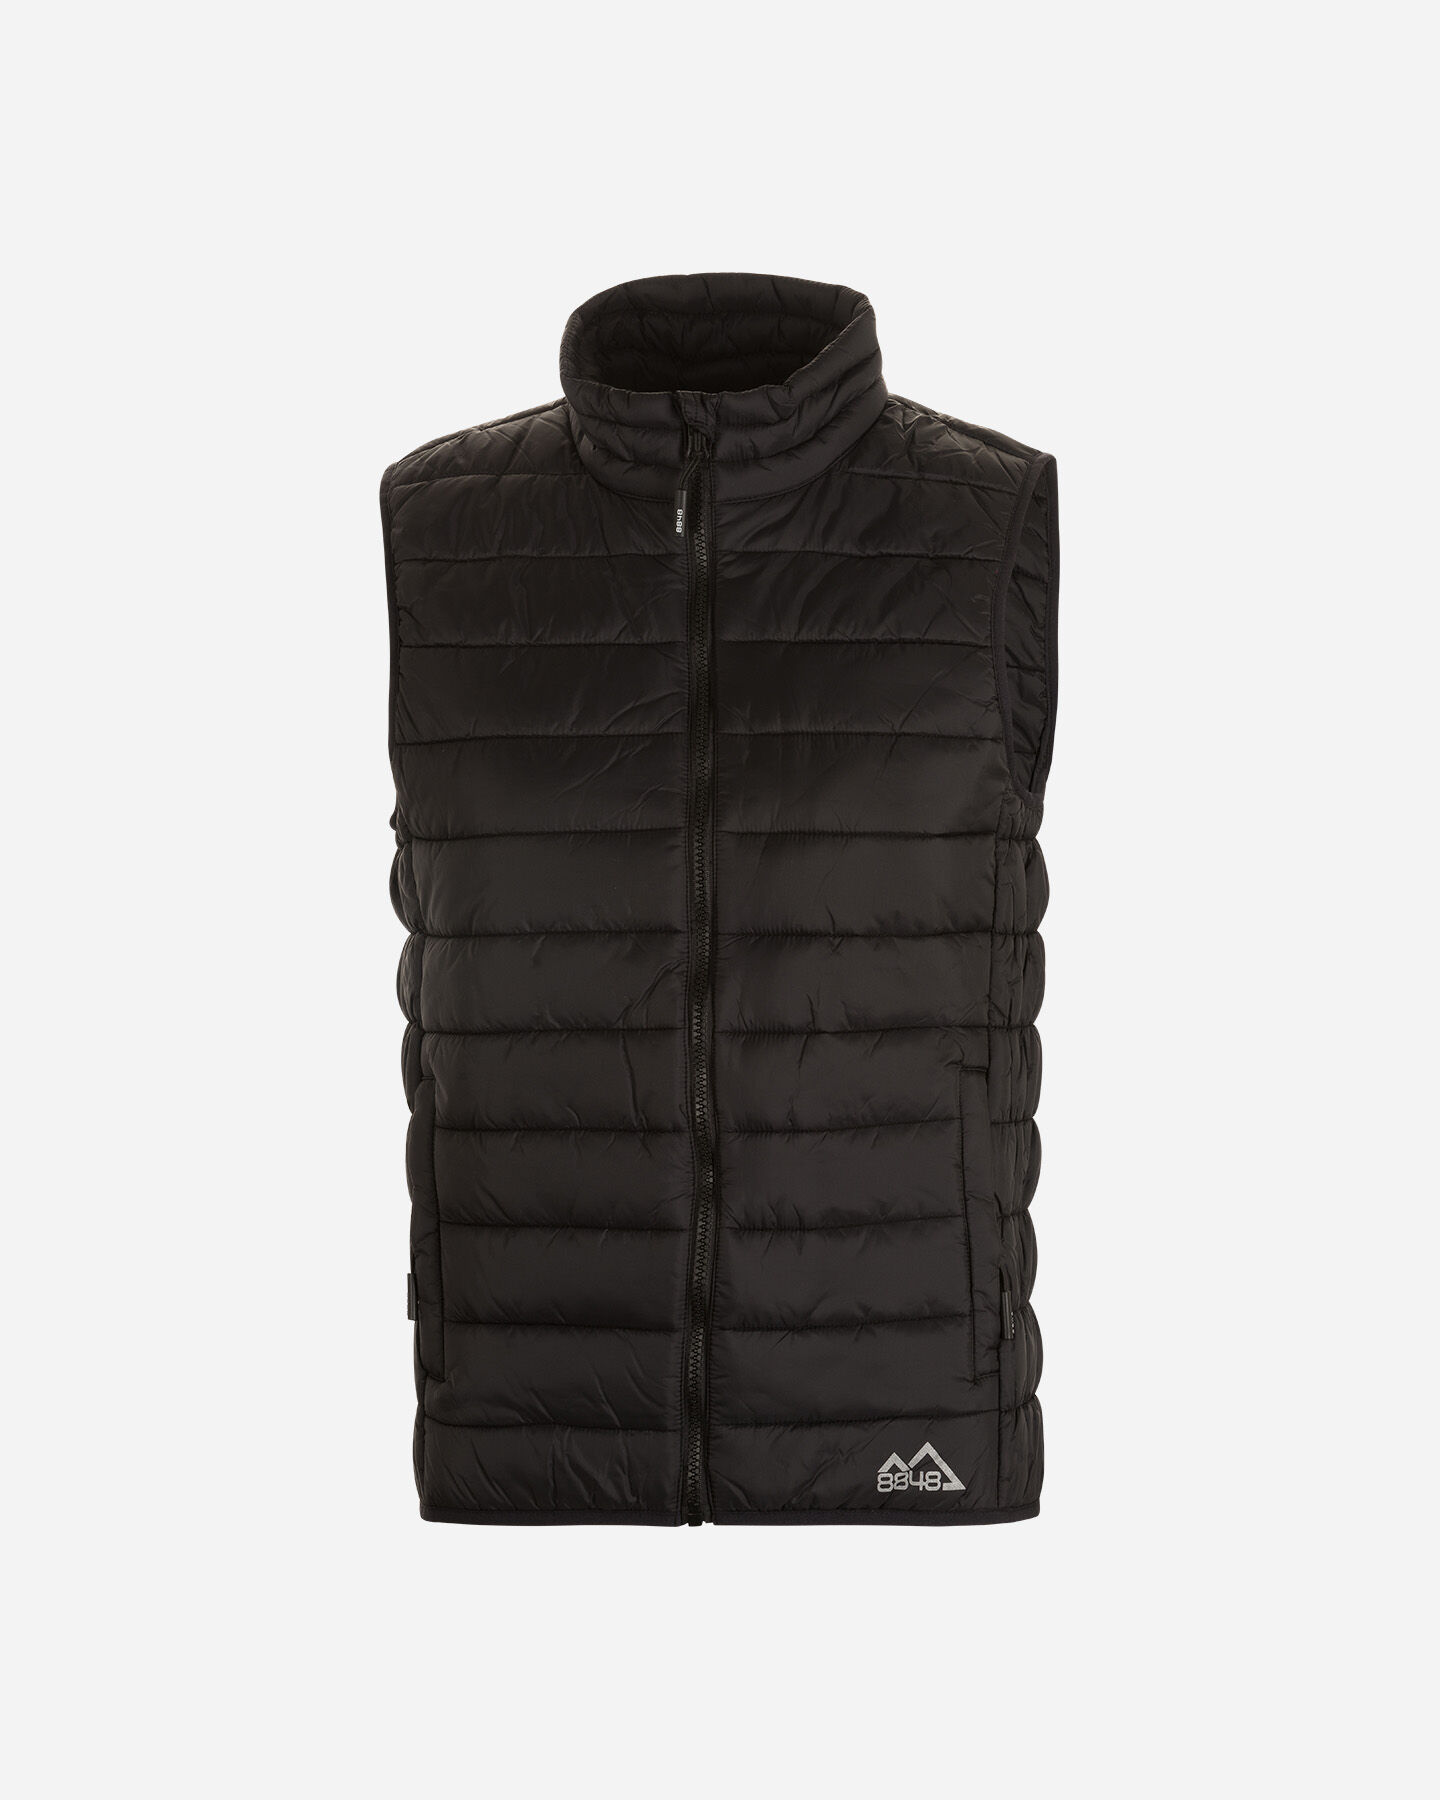  Gilet 8848 PADDED W S4094215|050|XS scatto 0